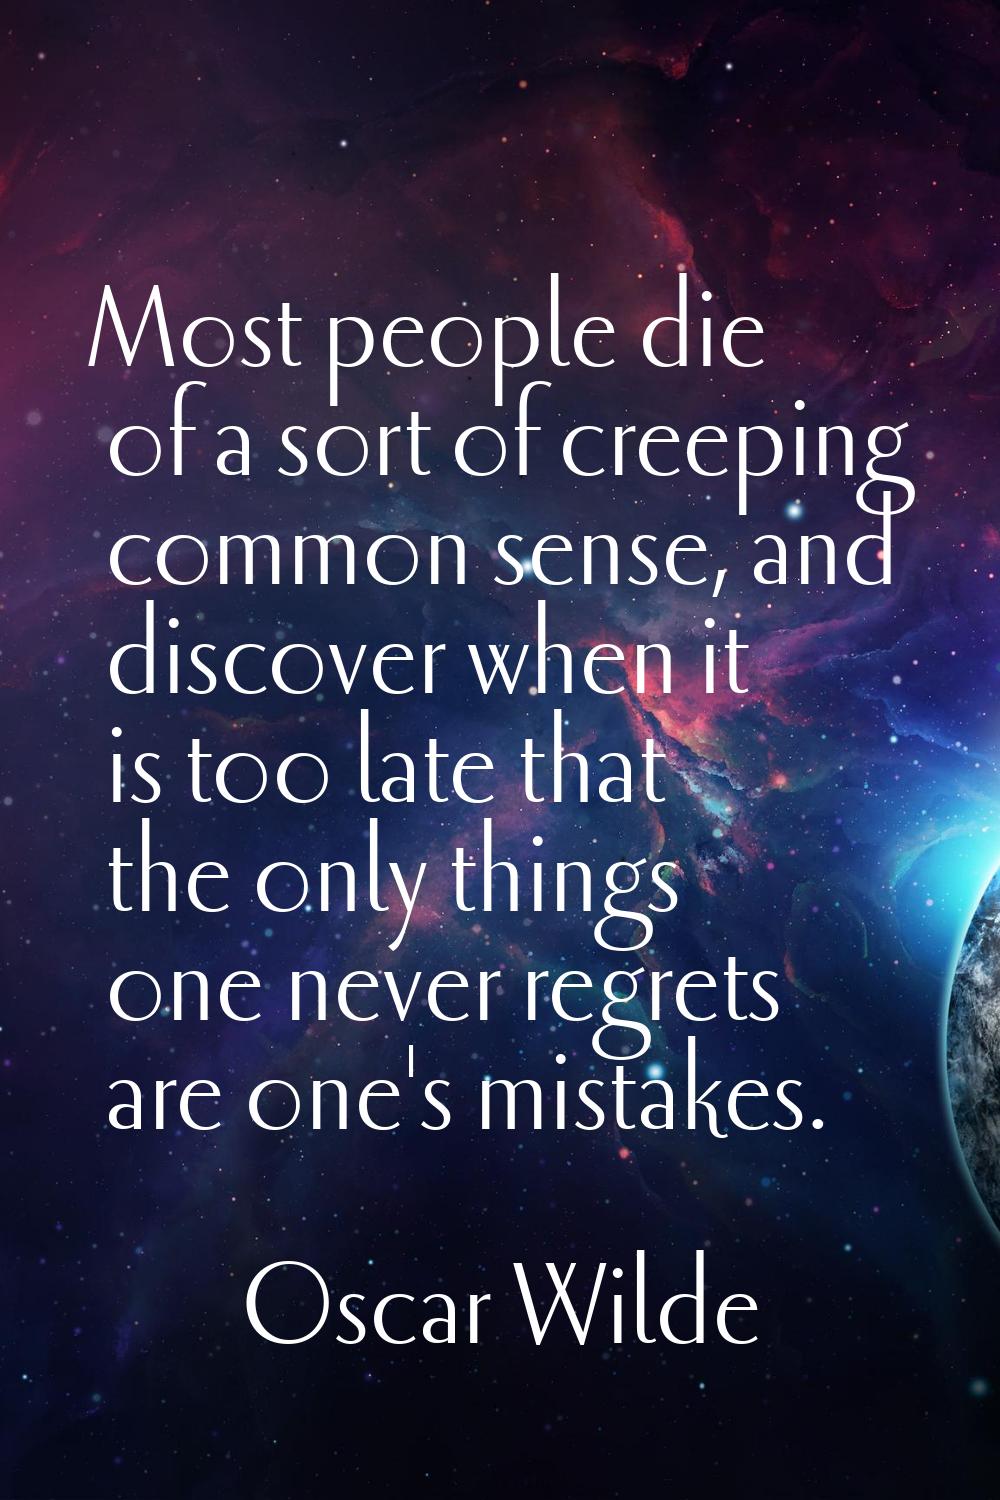 Most people die of a sort of creeping common sense, and discover when it is too late that the only 